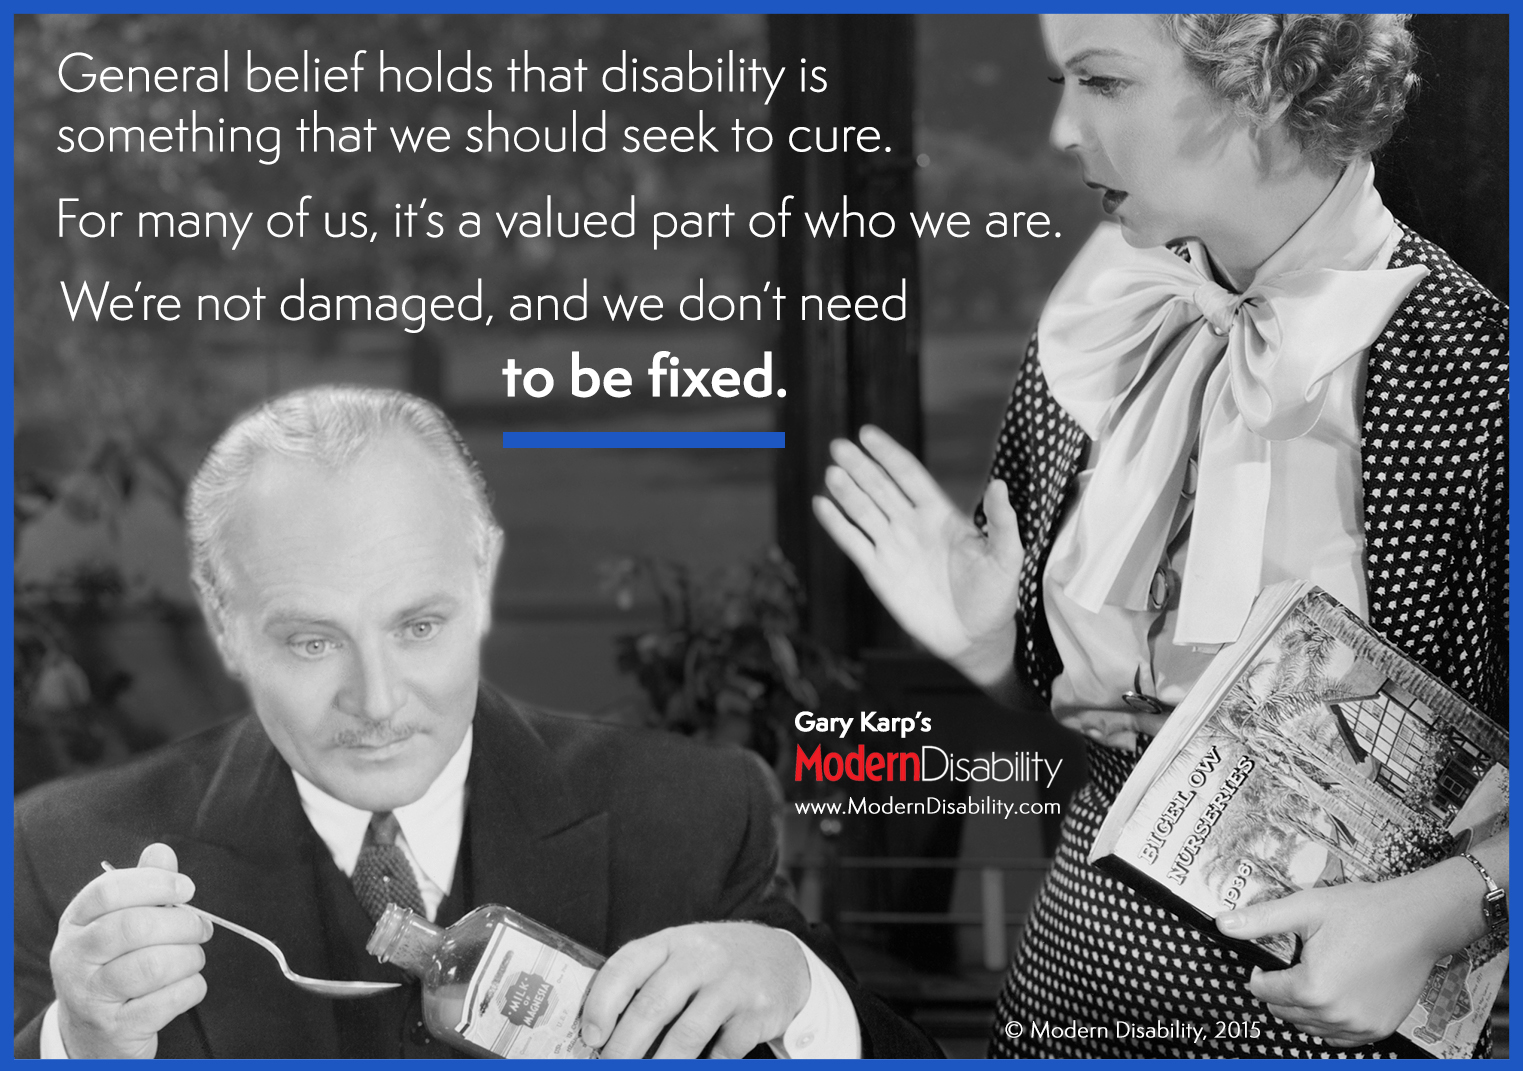 A vintage image of a woman with a shocked expression looking down at a man pouring some elixir into a spoon: "General belief holds that disability is something that we should seek to cure. For many of us, it's a valued part of who we are. We're not damaged, and we don't need to be fixed."